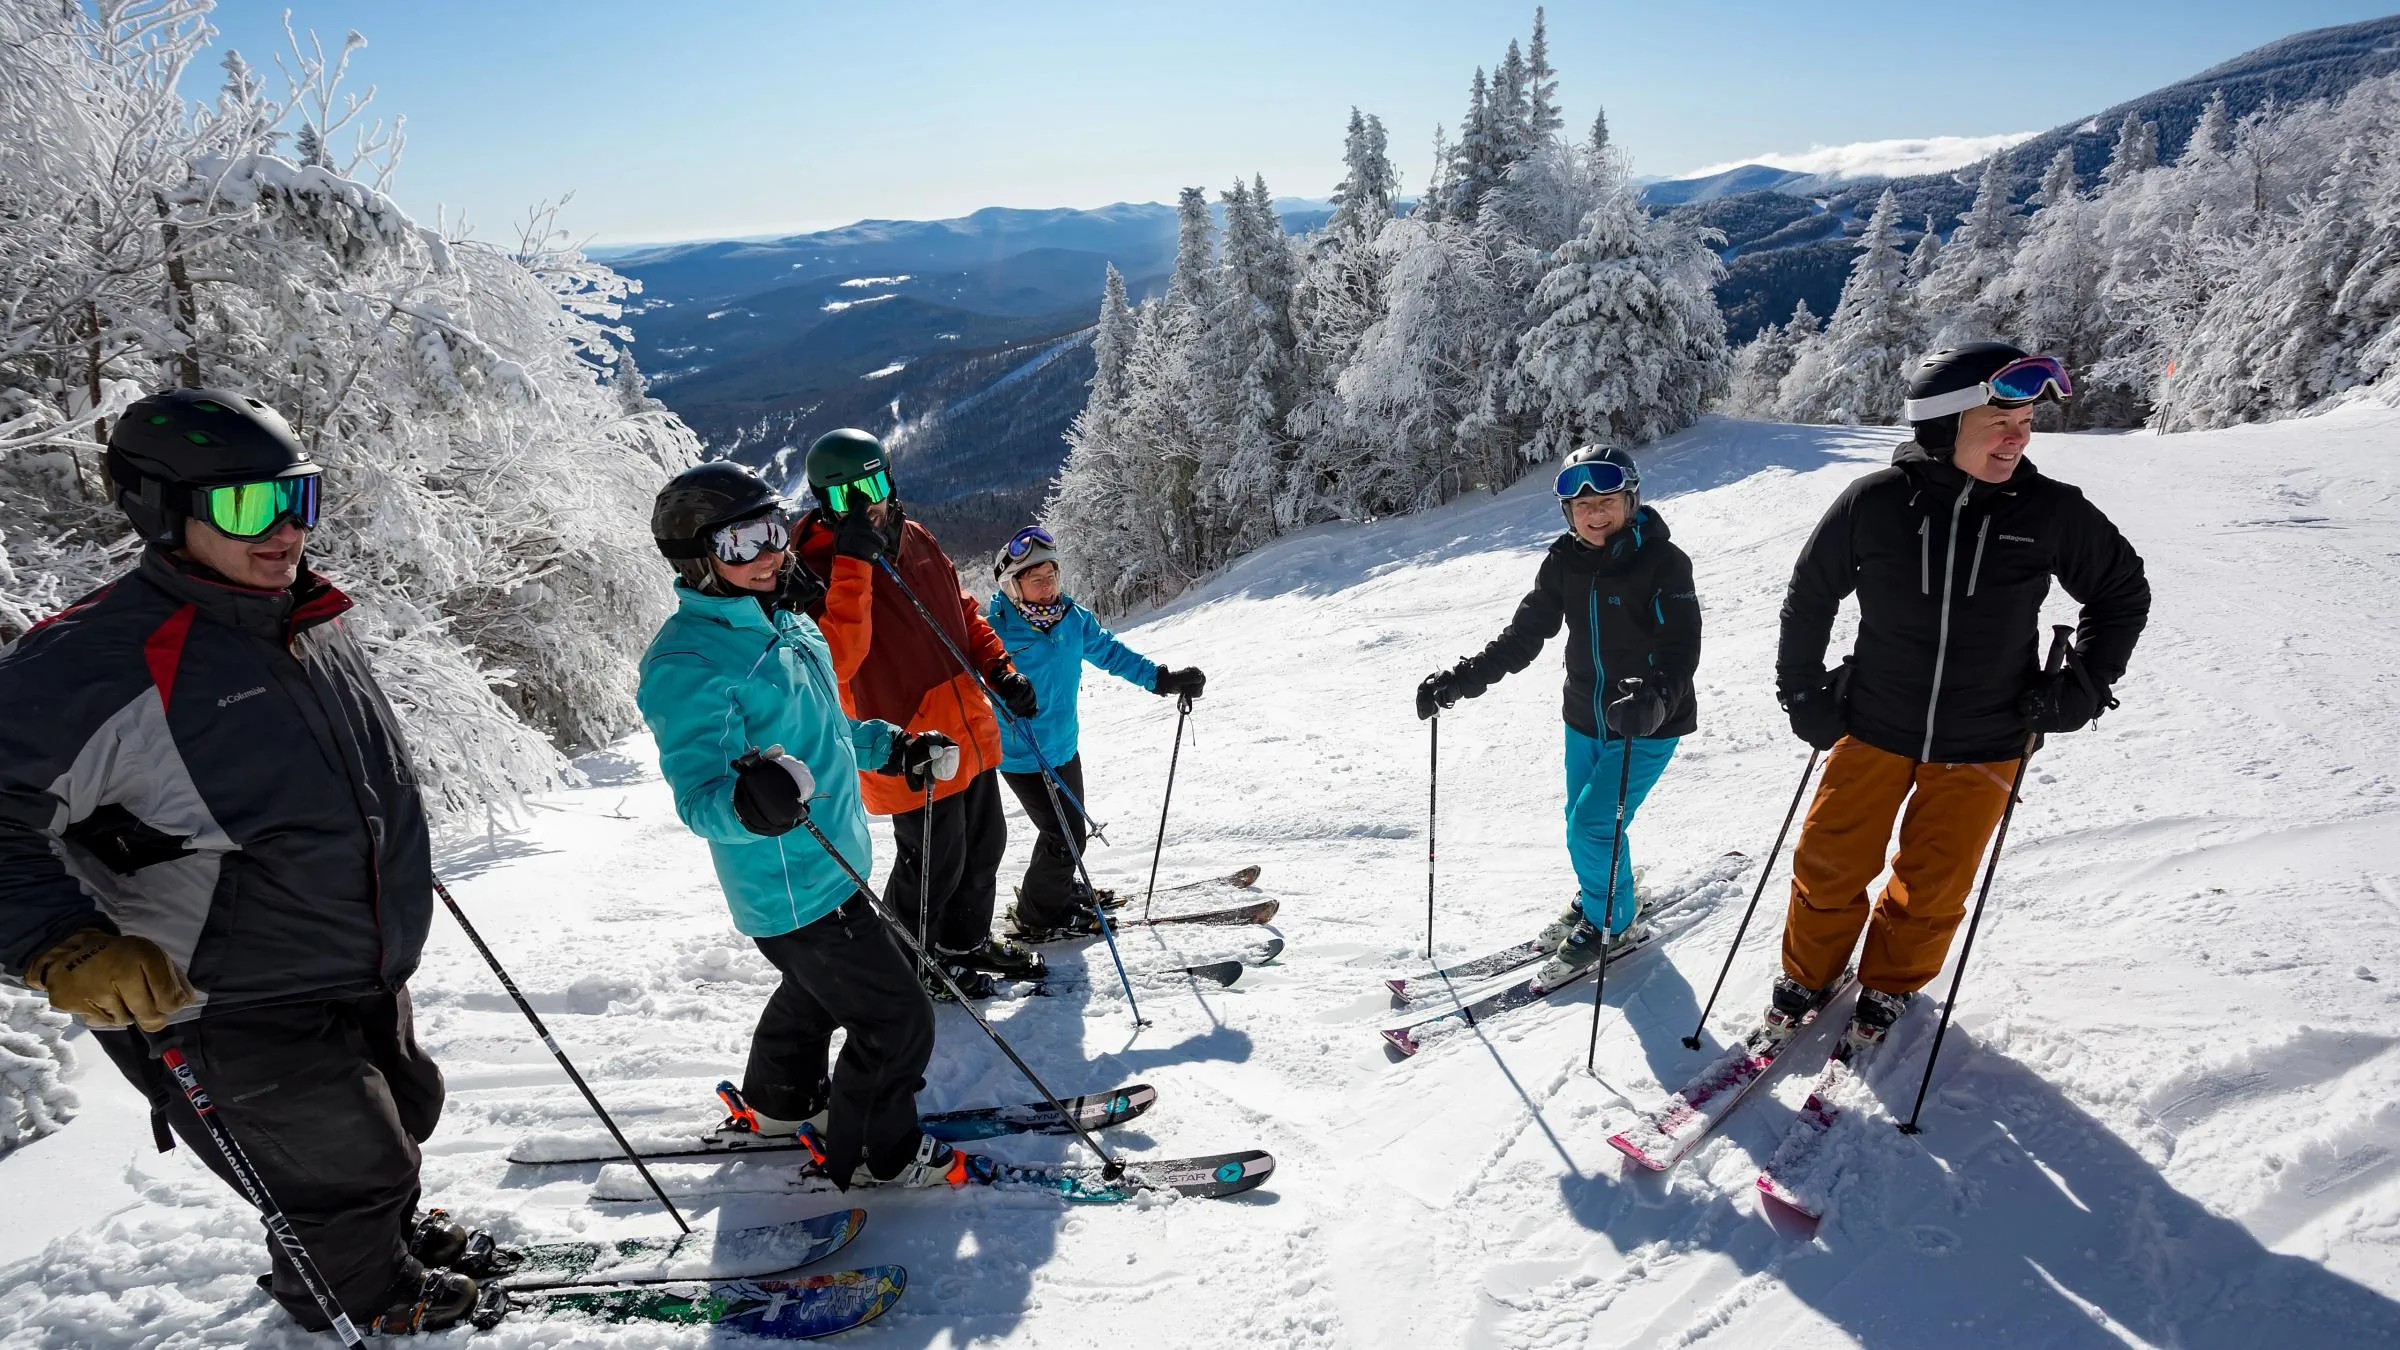 Group of skiers on a hill